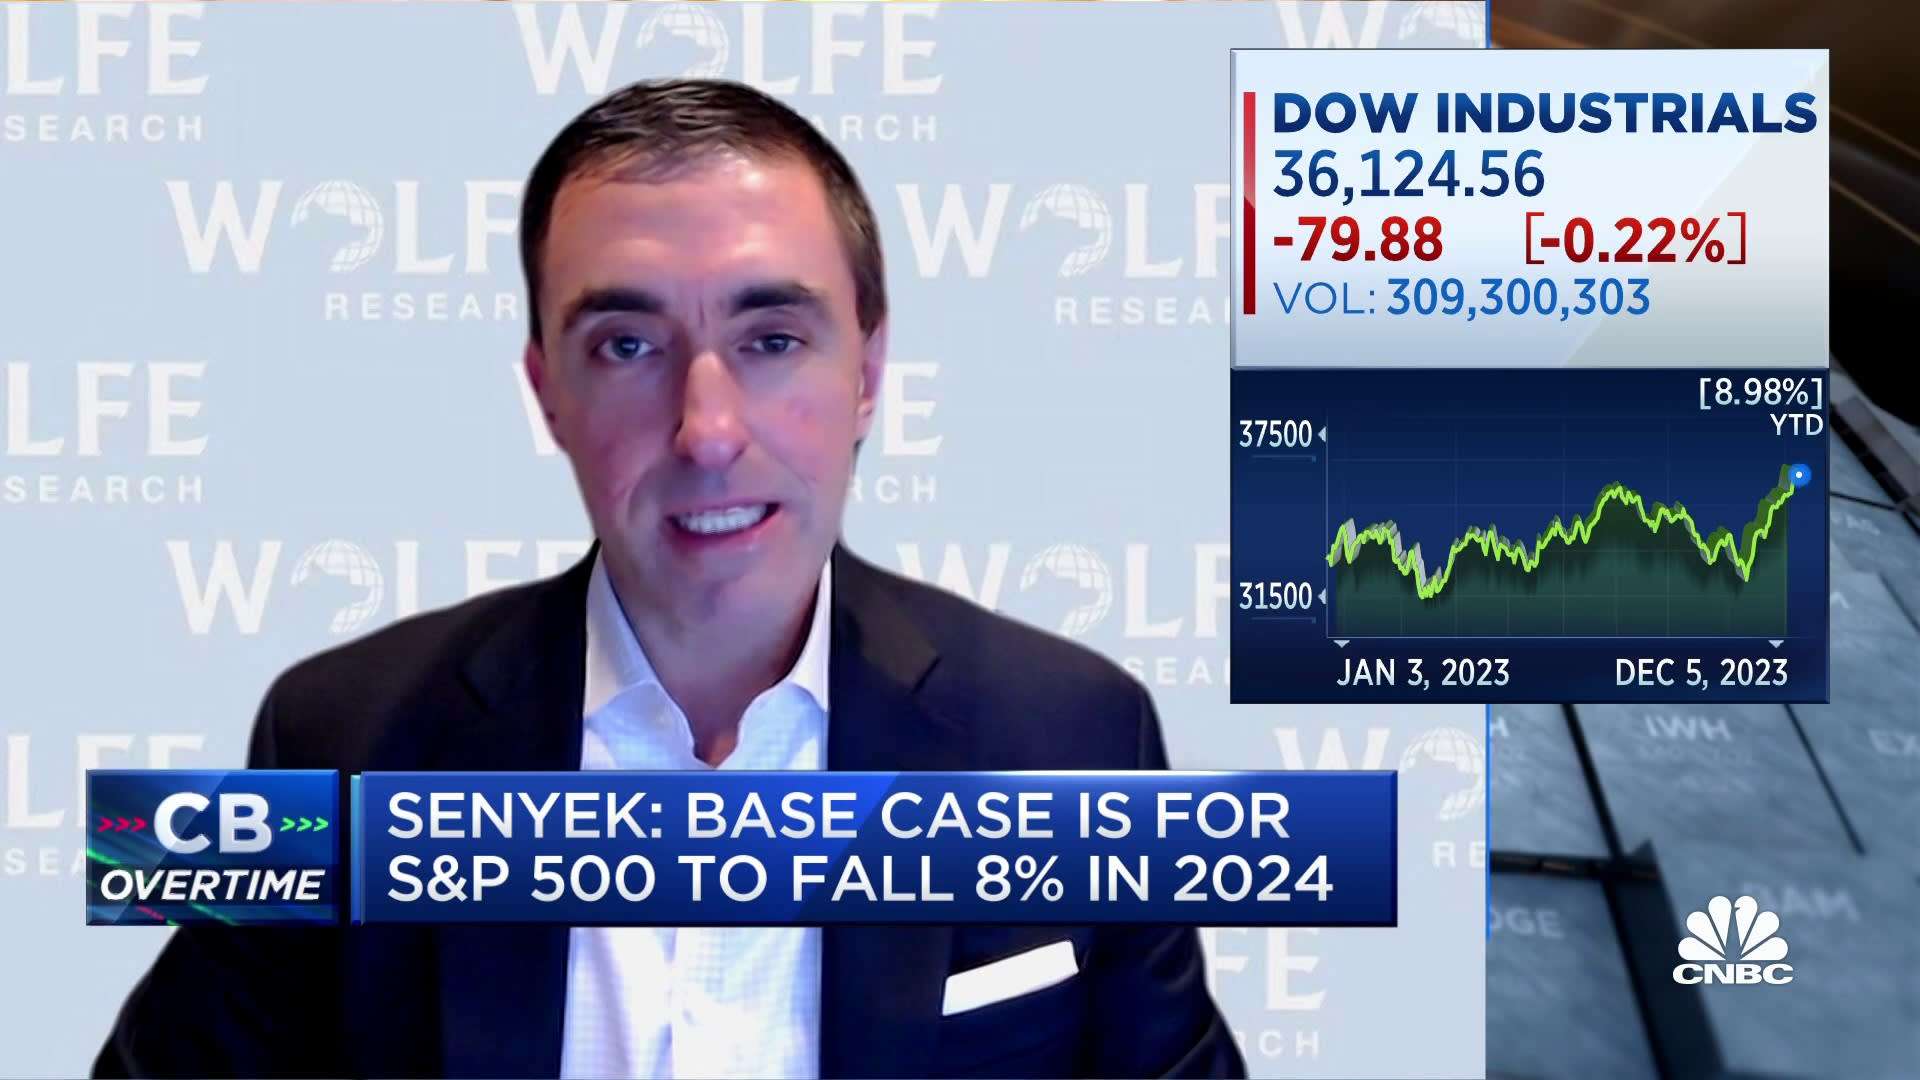 Cooling inflation will be a 'double-edged sword' for companies, says Wolfe Research's Chris Senyek